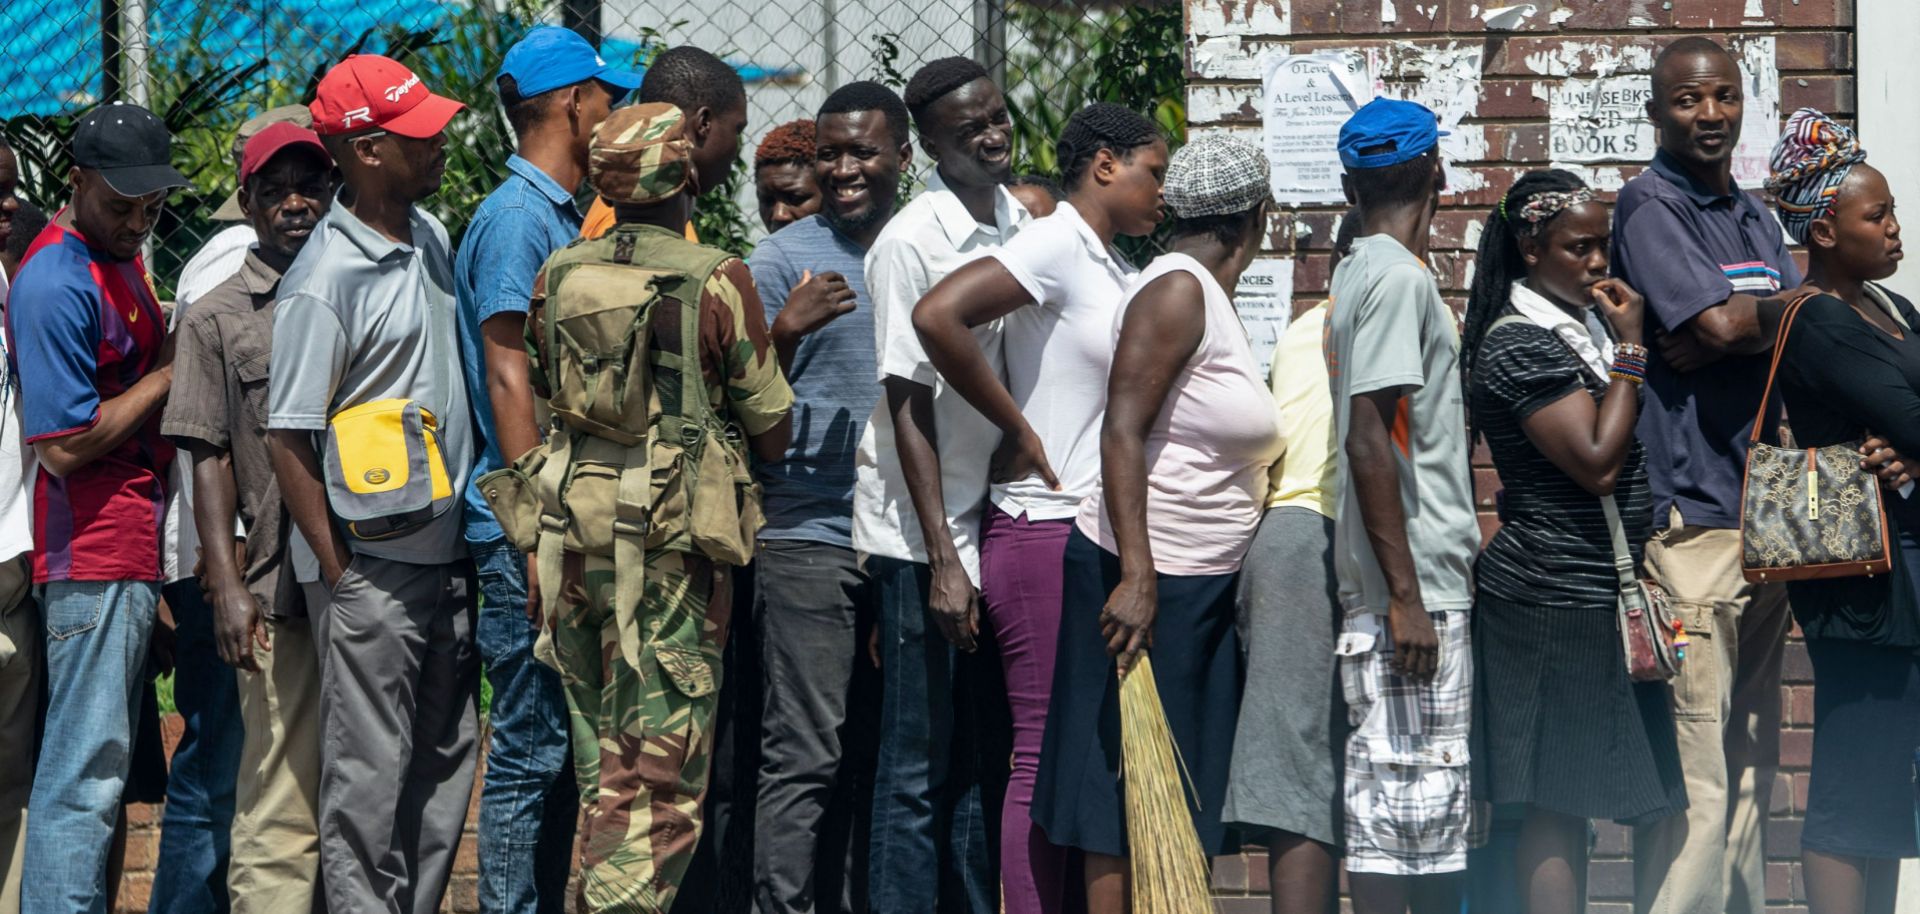 A Zimbabwean soldier watches shoppers lining up in Bulawayo on Jan. 17, 2019.